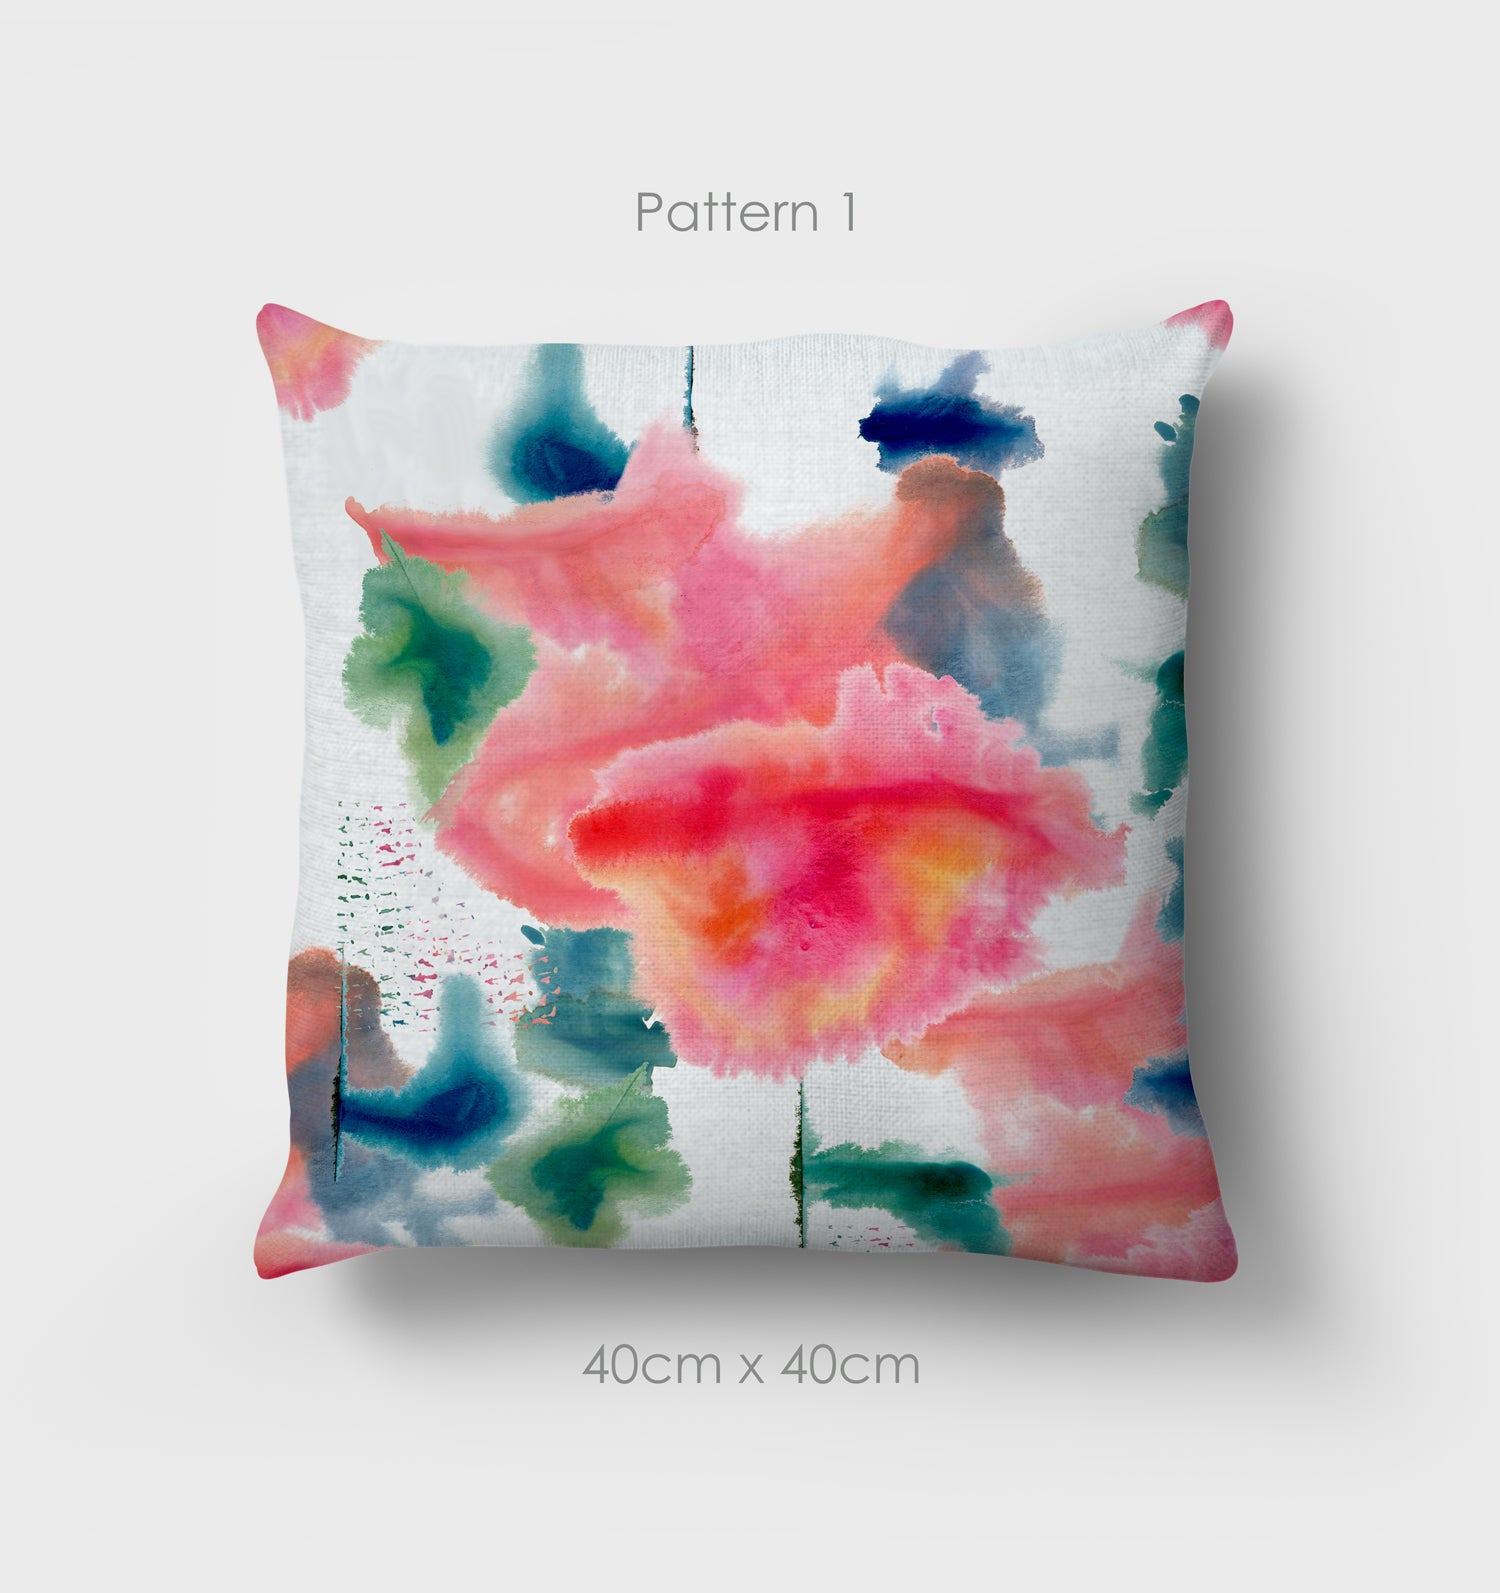 Spring Falls cushion, 40cm, pattern1, the pink cloud like pattern is the central focus of the cushion. Hand painted water colour design. Green and blue colours adorn the rim of the cushion.